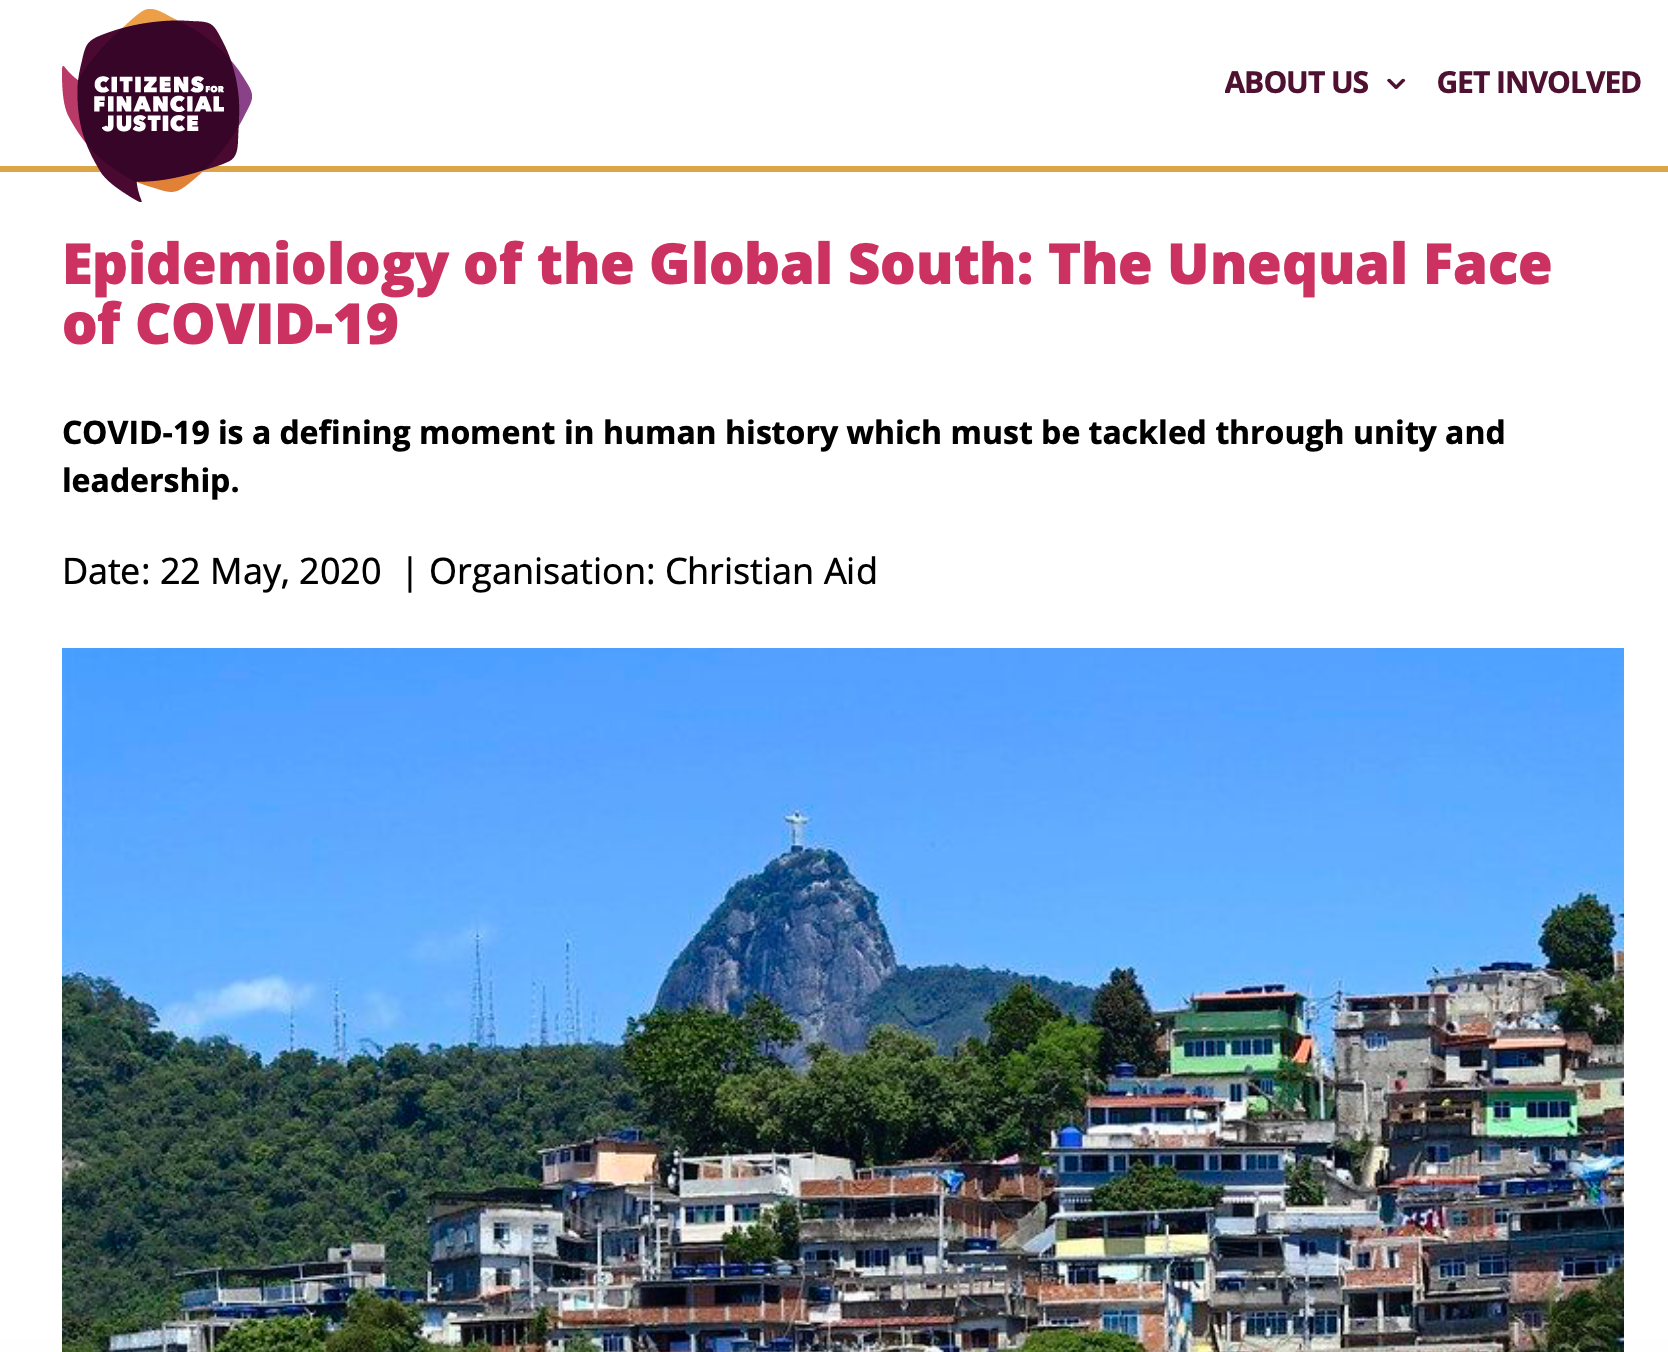 Epidemiology of the Global South-The Unequal Face of COVID-19